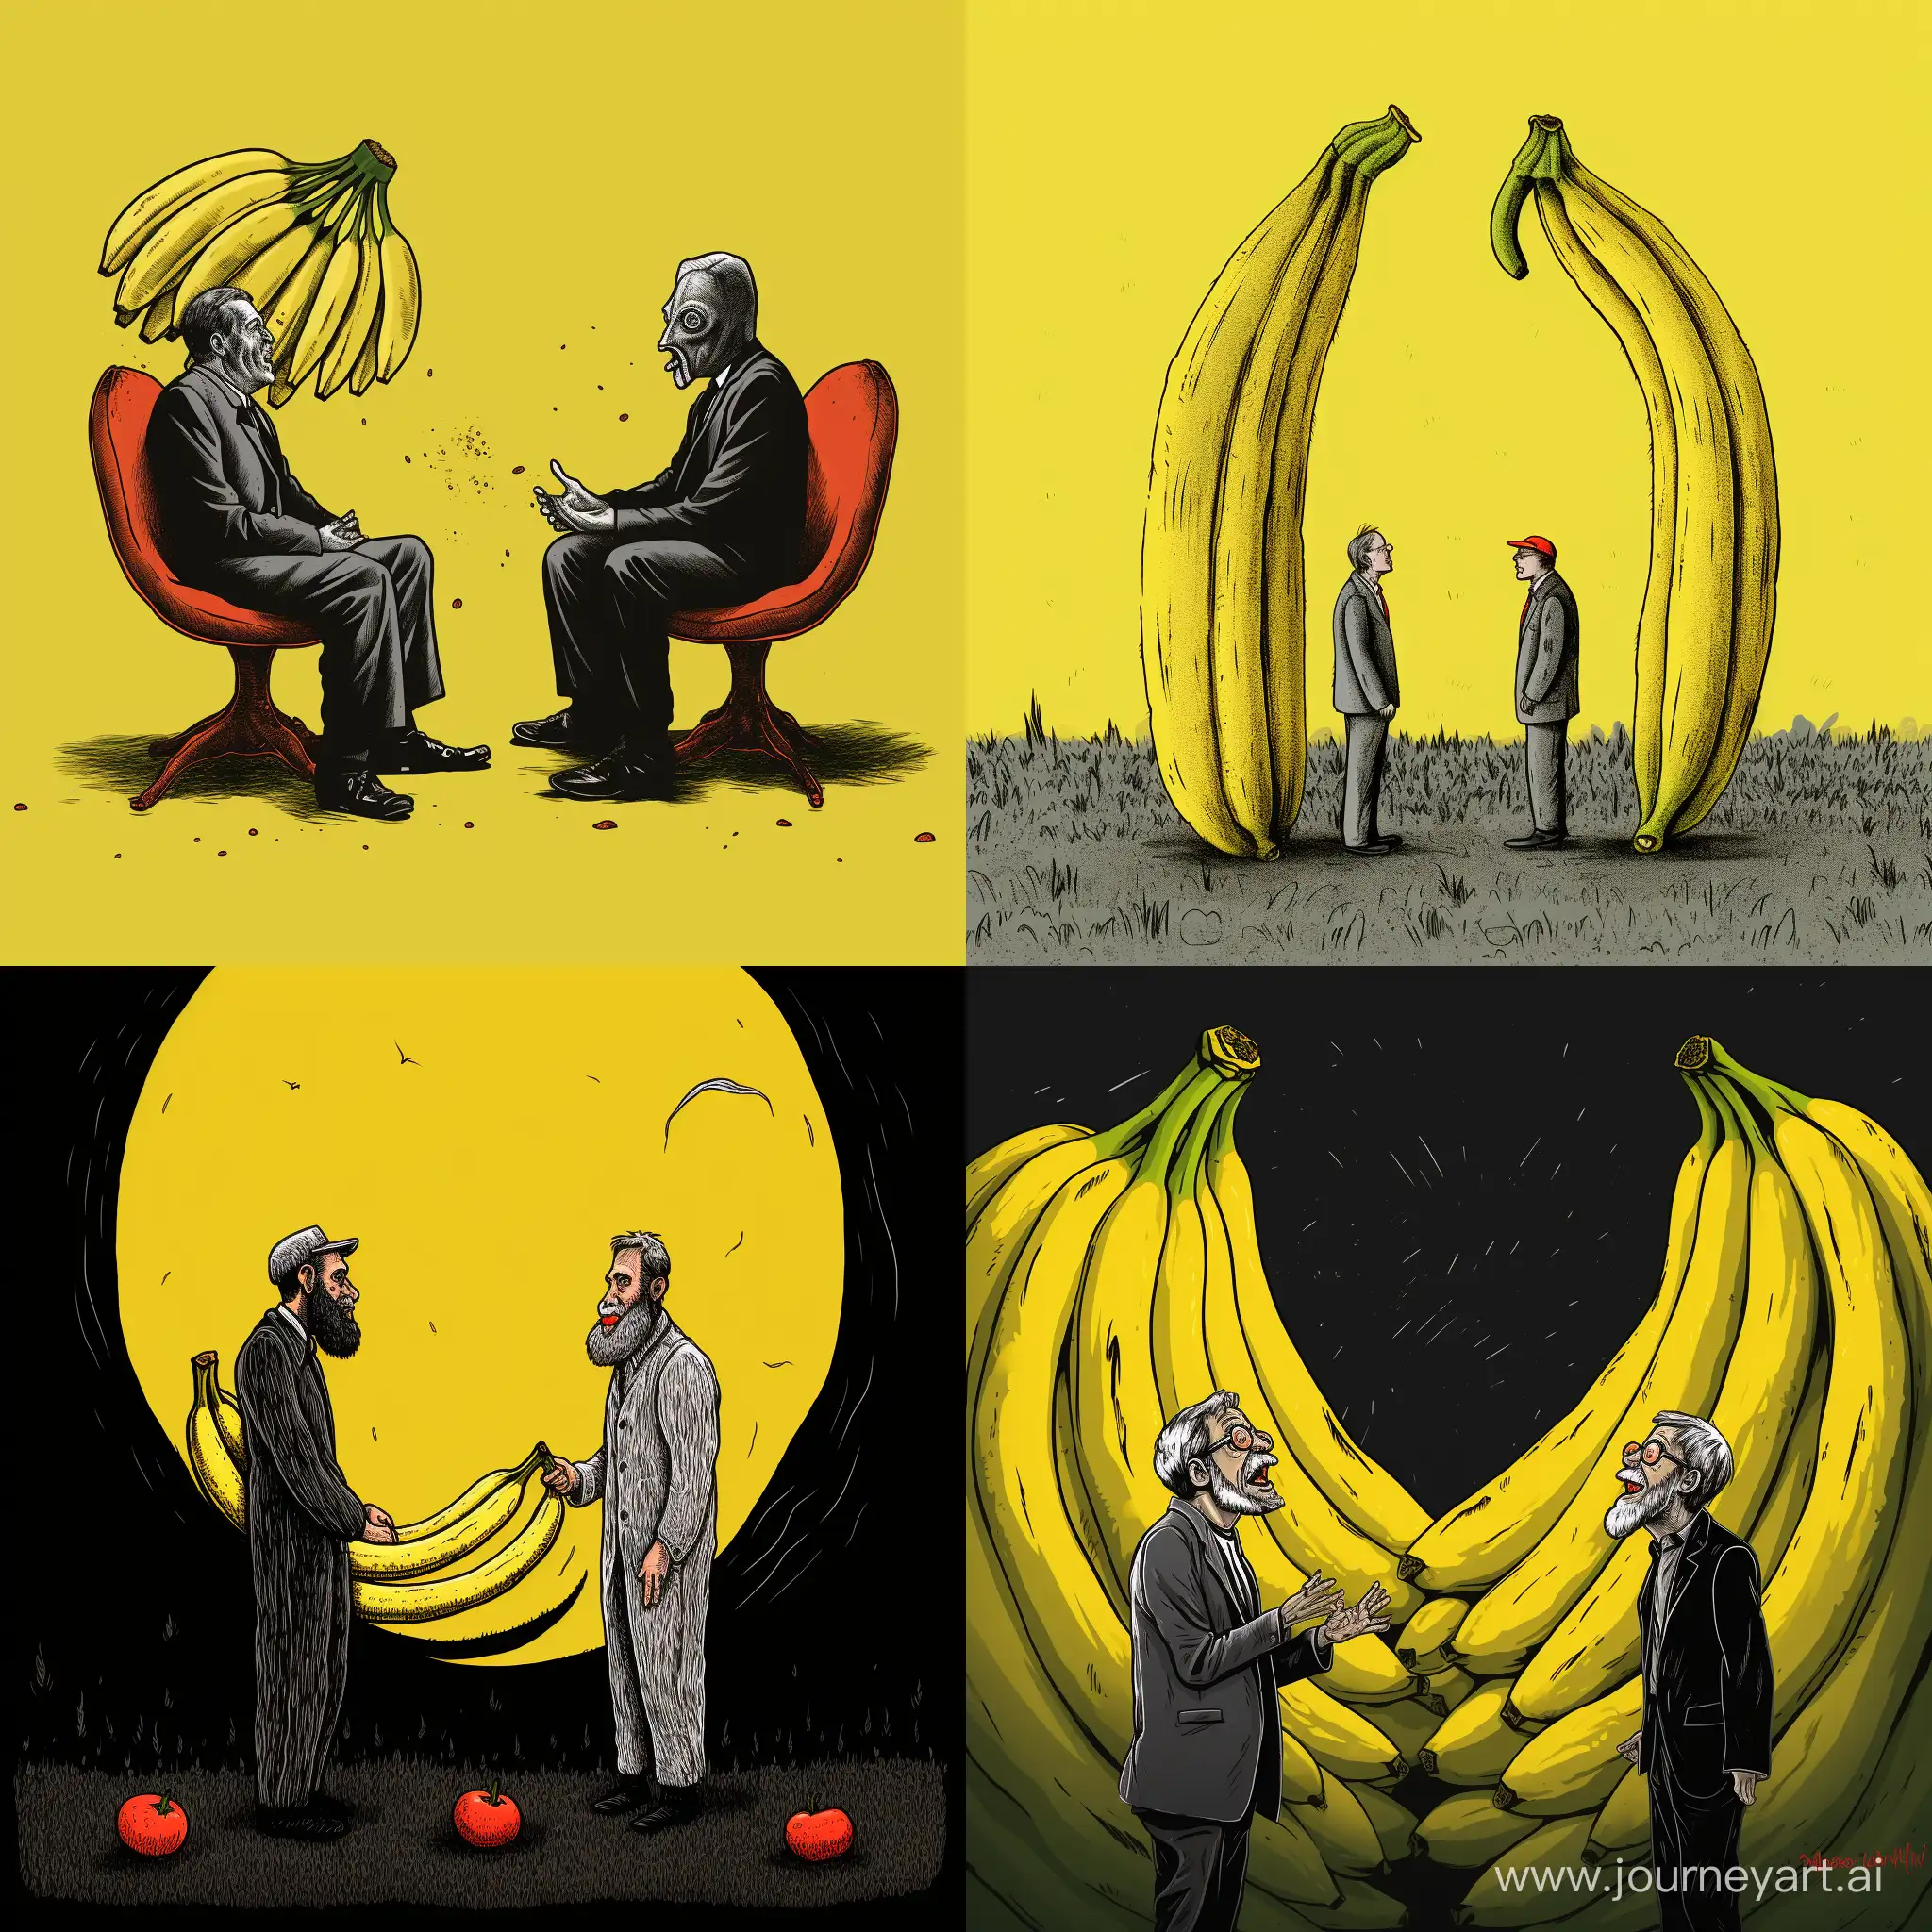 Philosophical-Debate-between-Two-Bananas-on-the-Meaning-of-Life